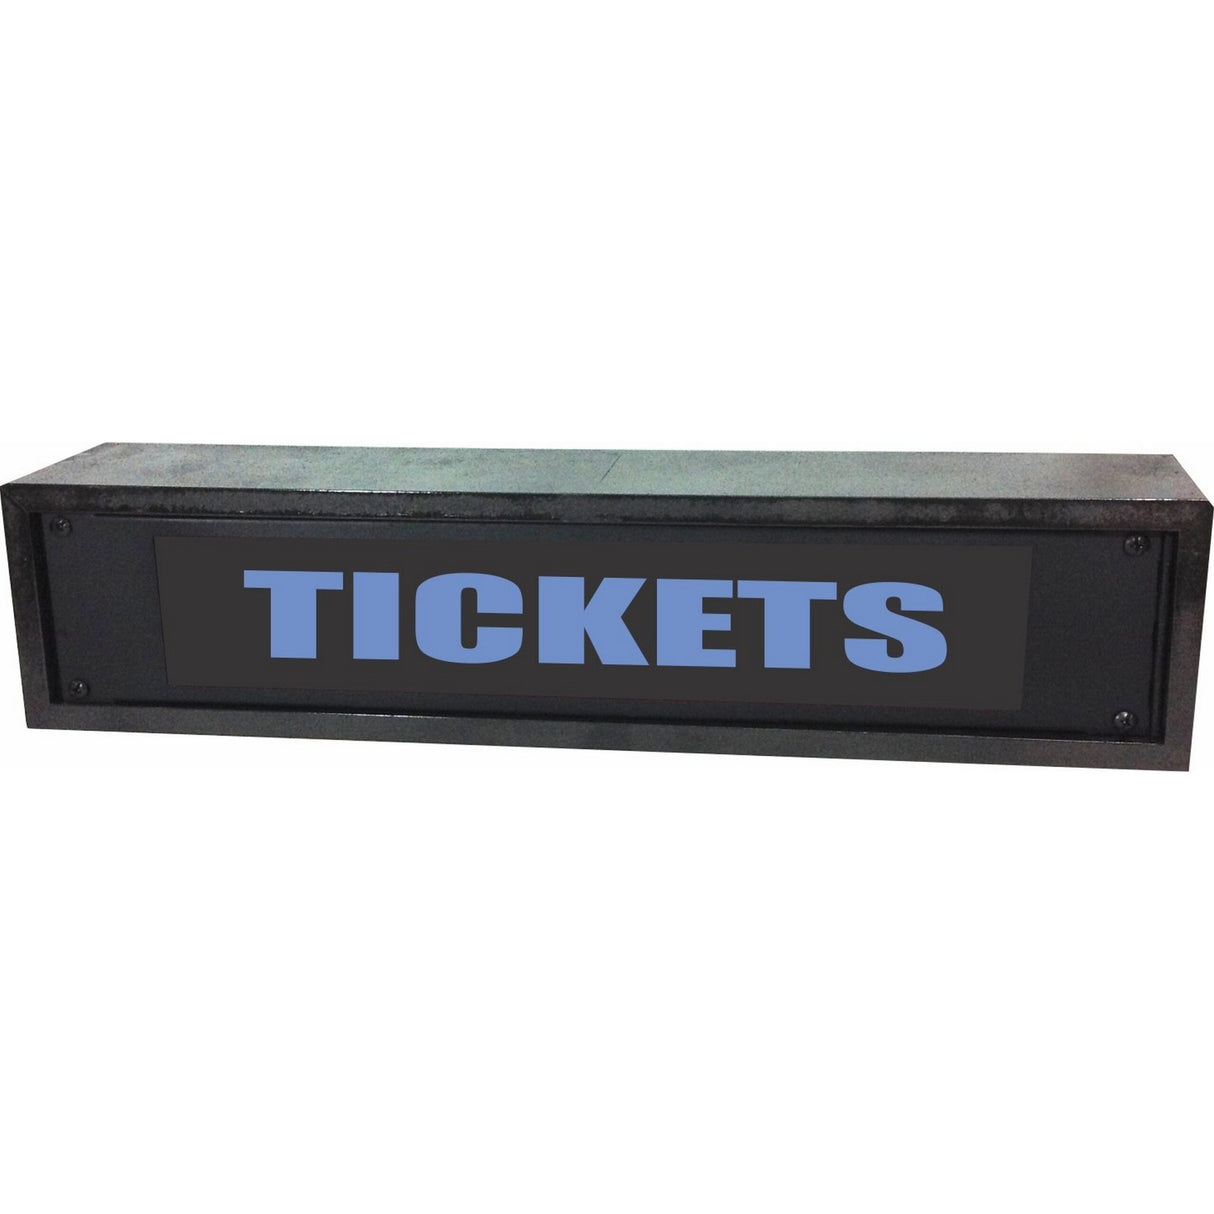 American Recorder OAS-4055BL "TICKETS" 2U Rackmount LED Lighted Sign with Enclosure, Blue